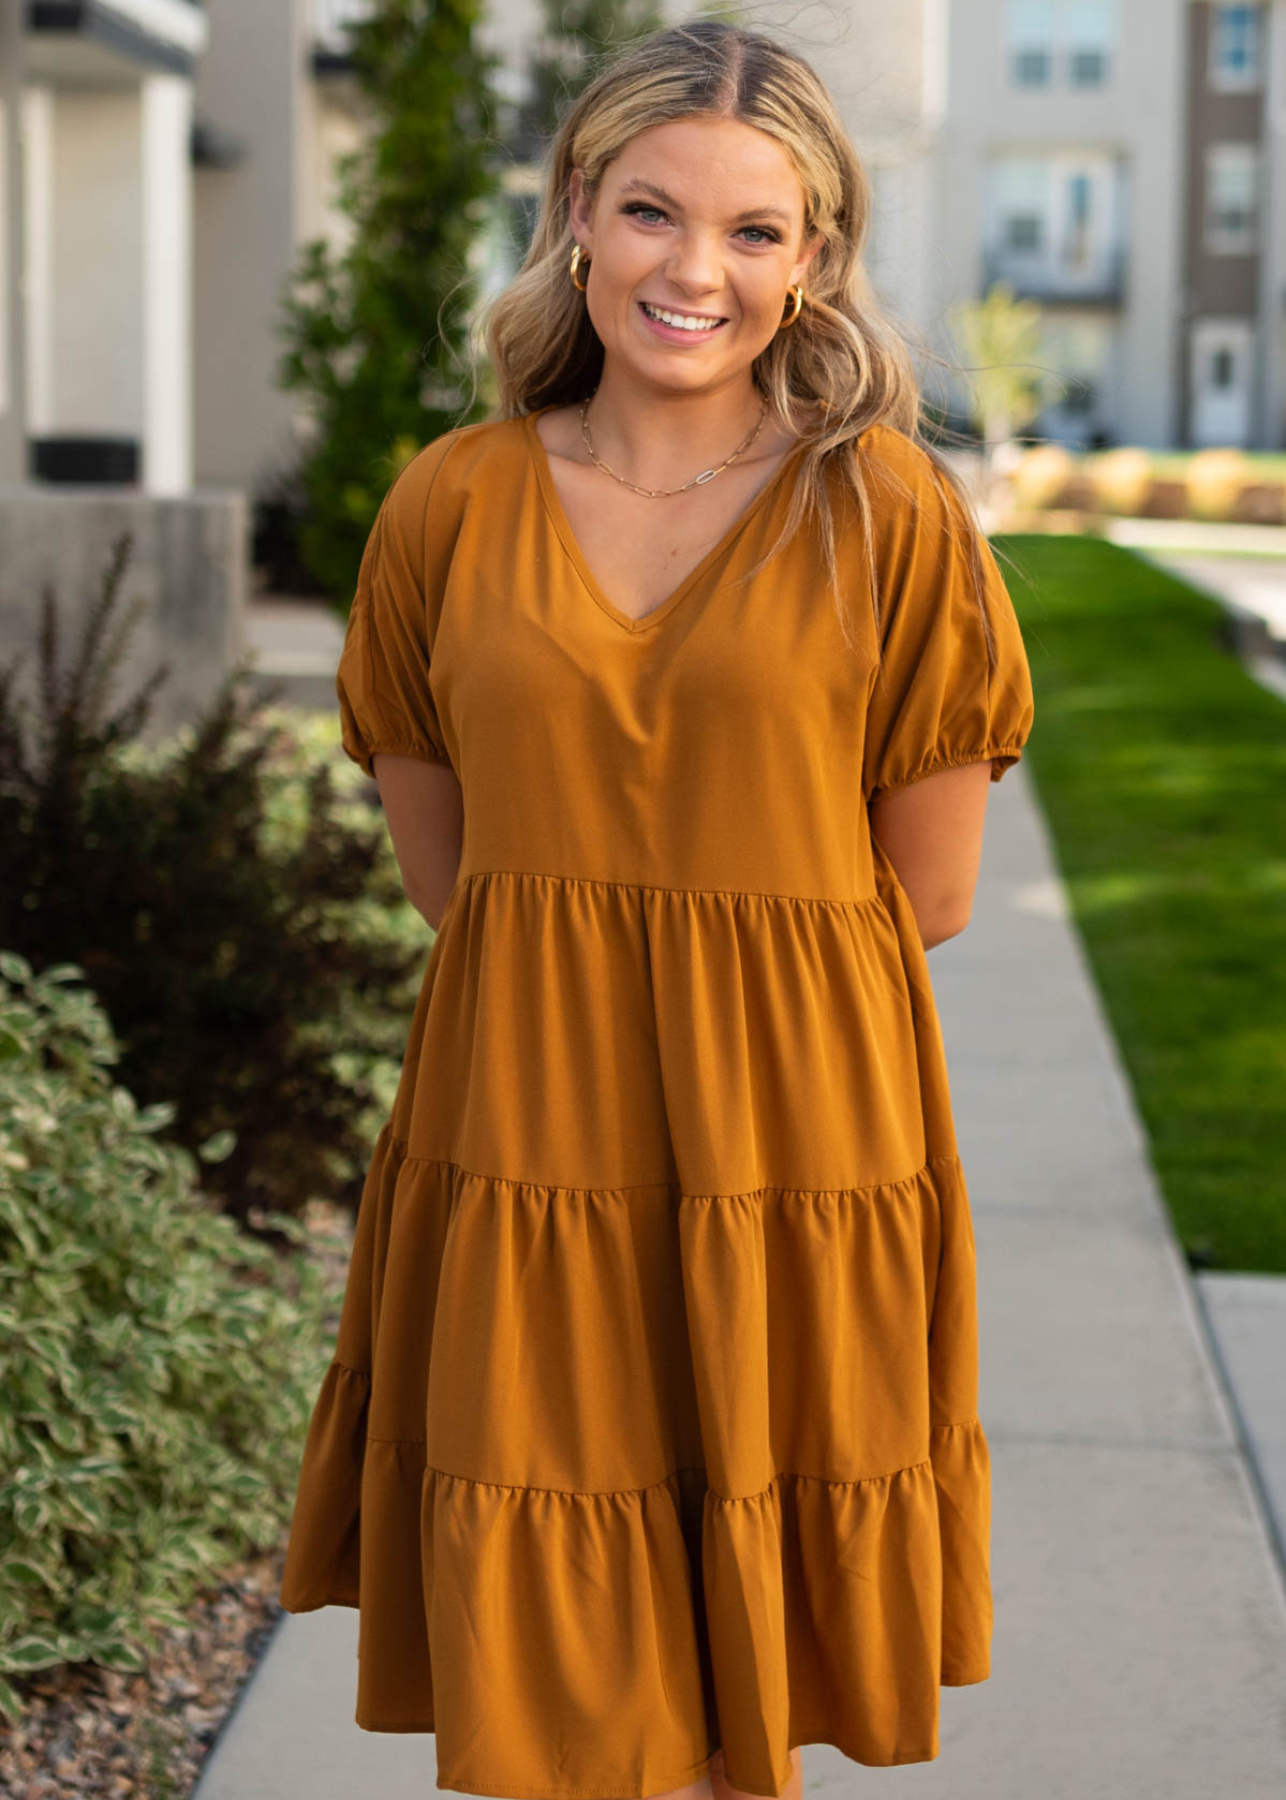 Short sleeve deep spice dress with a v-neck and a tiered skirt